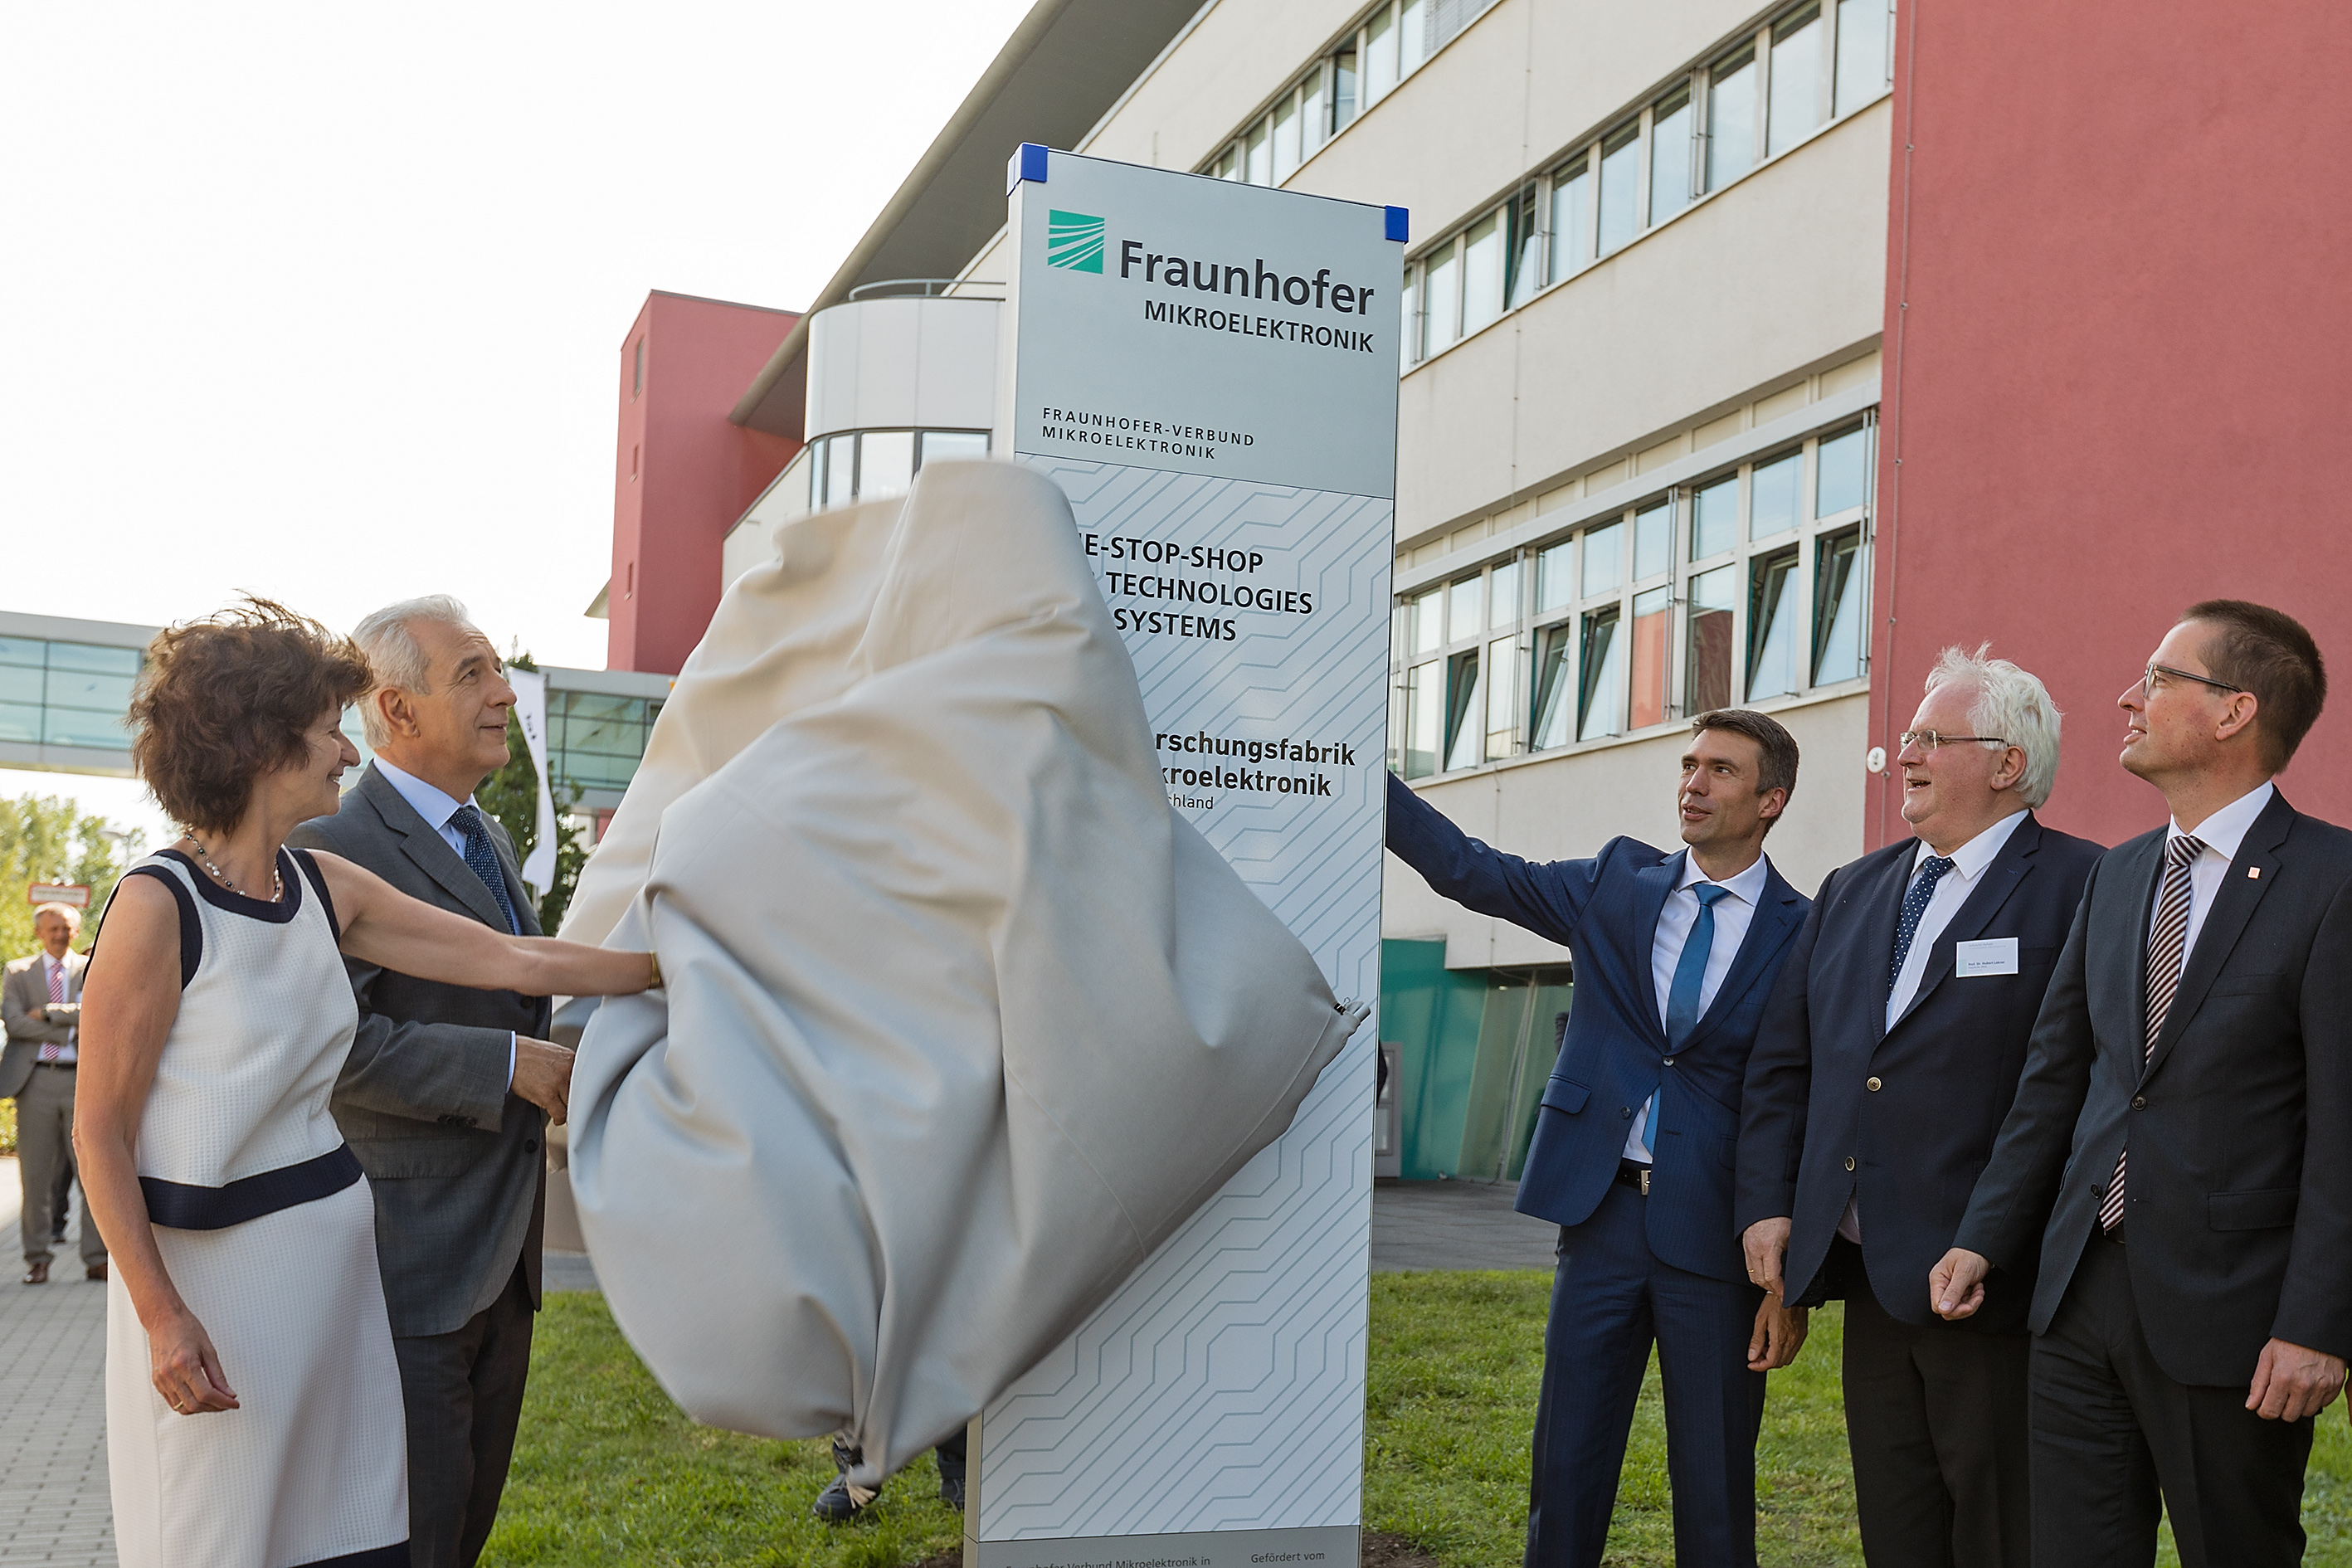 Dr. Eva-Maria Stange, Minister of Science for Saxony; Stanislaw Tillich, Minister president of the Free State of Saxony; and Stefan Müller, Parliamentary State Secretary at the Federal Ministry for Education and Research; along with Prof. Hubert Lakner, chair of the Steering Committee of the Research Fab Microelectronics; and Prof. Georg Rosenfeld, member of the executive board of the Fraunhofer Society (from left to right) at the symbolic unveiling of the entrance column at the Fraunhofer Institute for photonic measurement systems in Dresden.